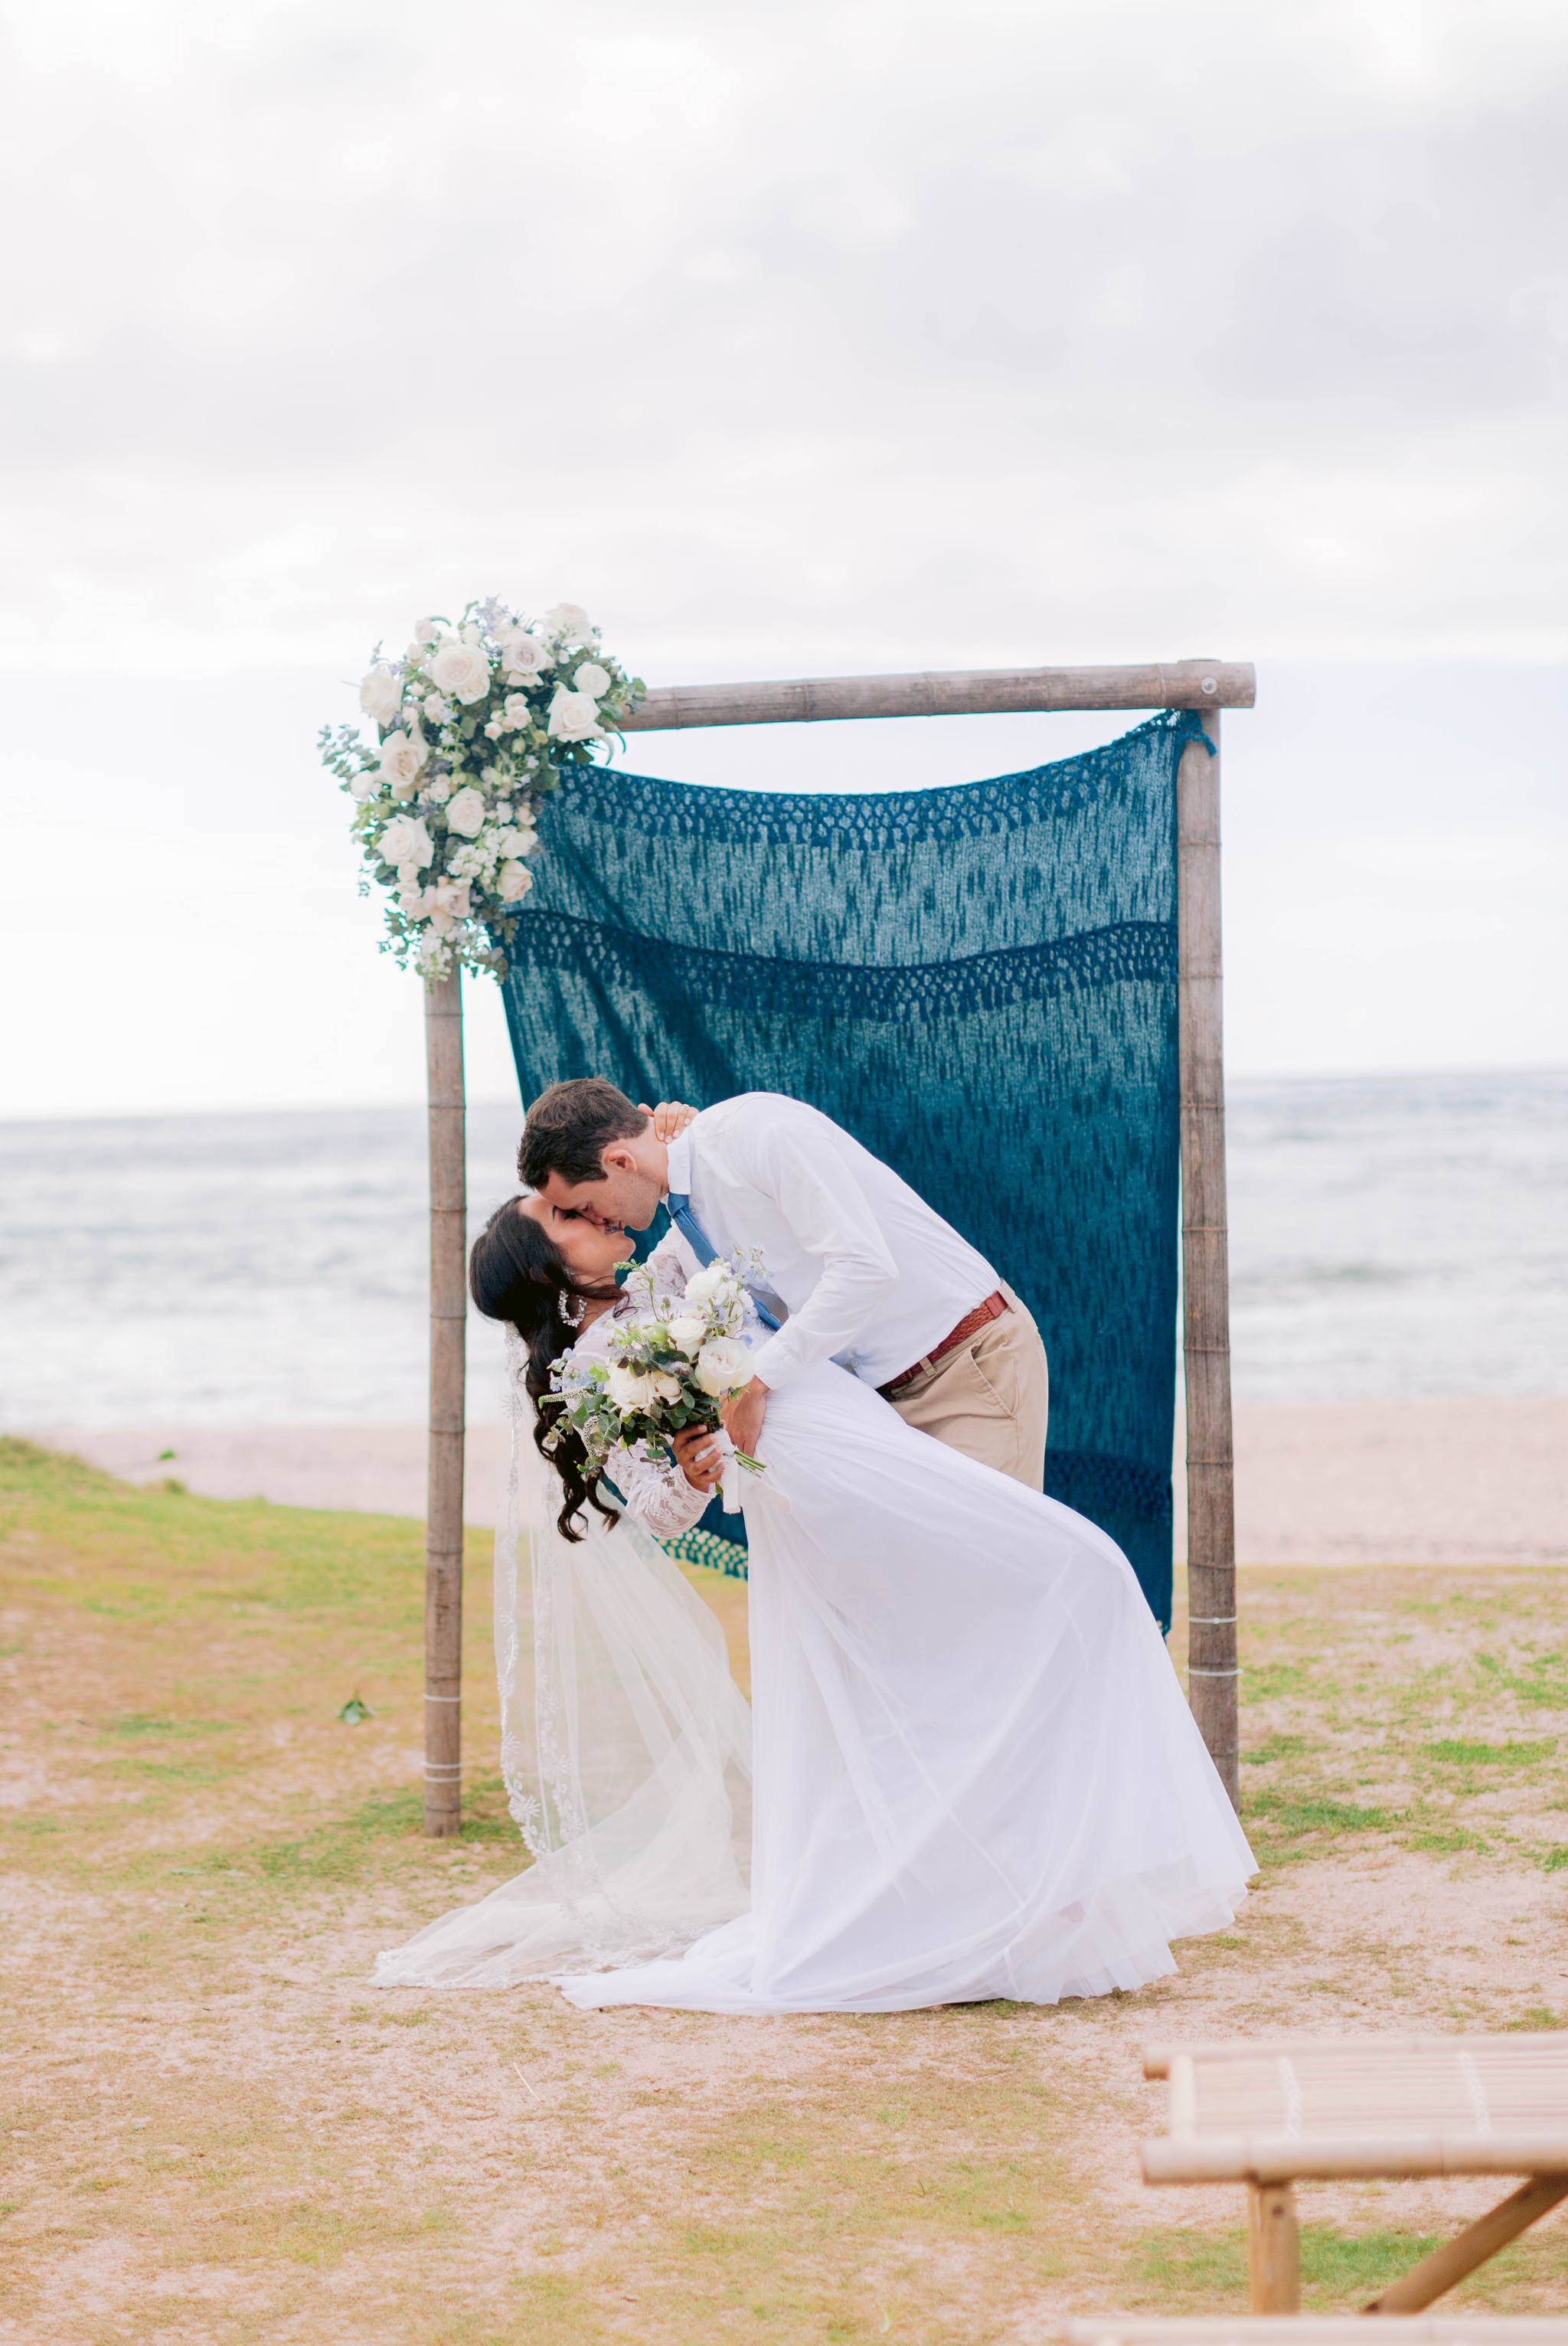 The first kiss between bride and broom at the ceremony Ana + Elijah - Wedding at Loulu Palm in Haleiwa, HI - Oahu Hawaii Wedding Photographer 